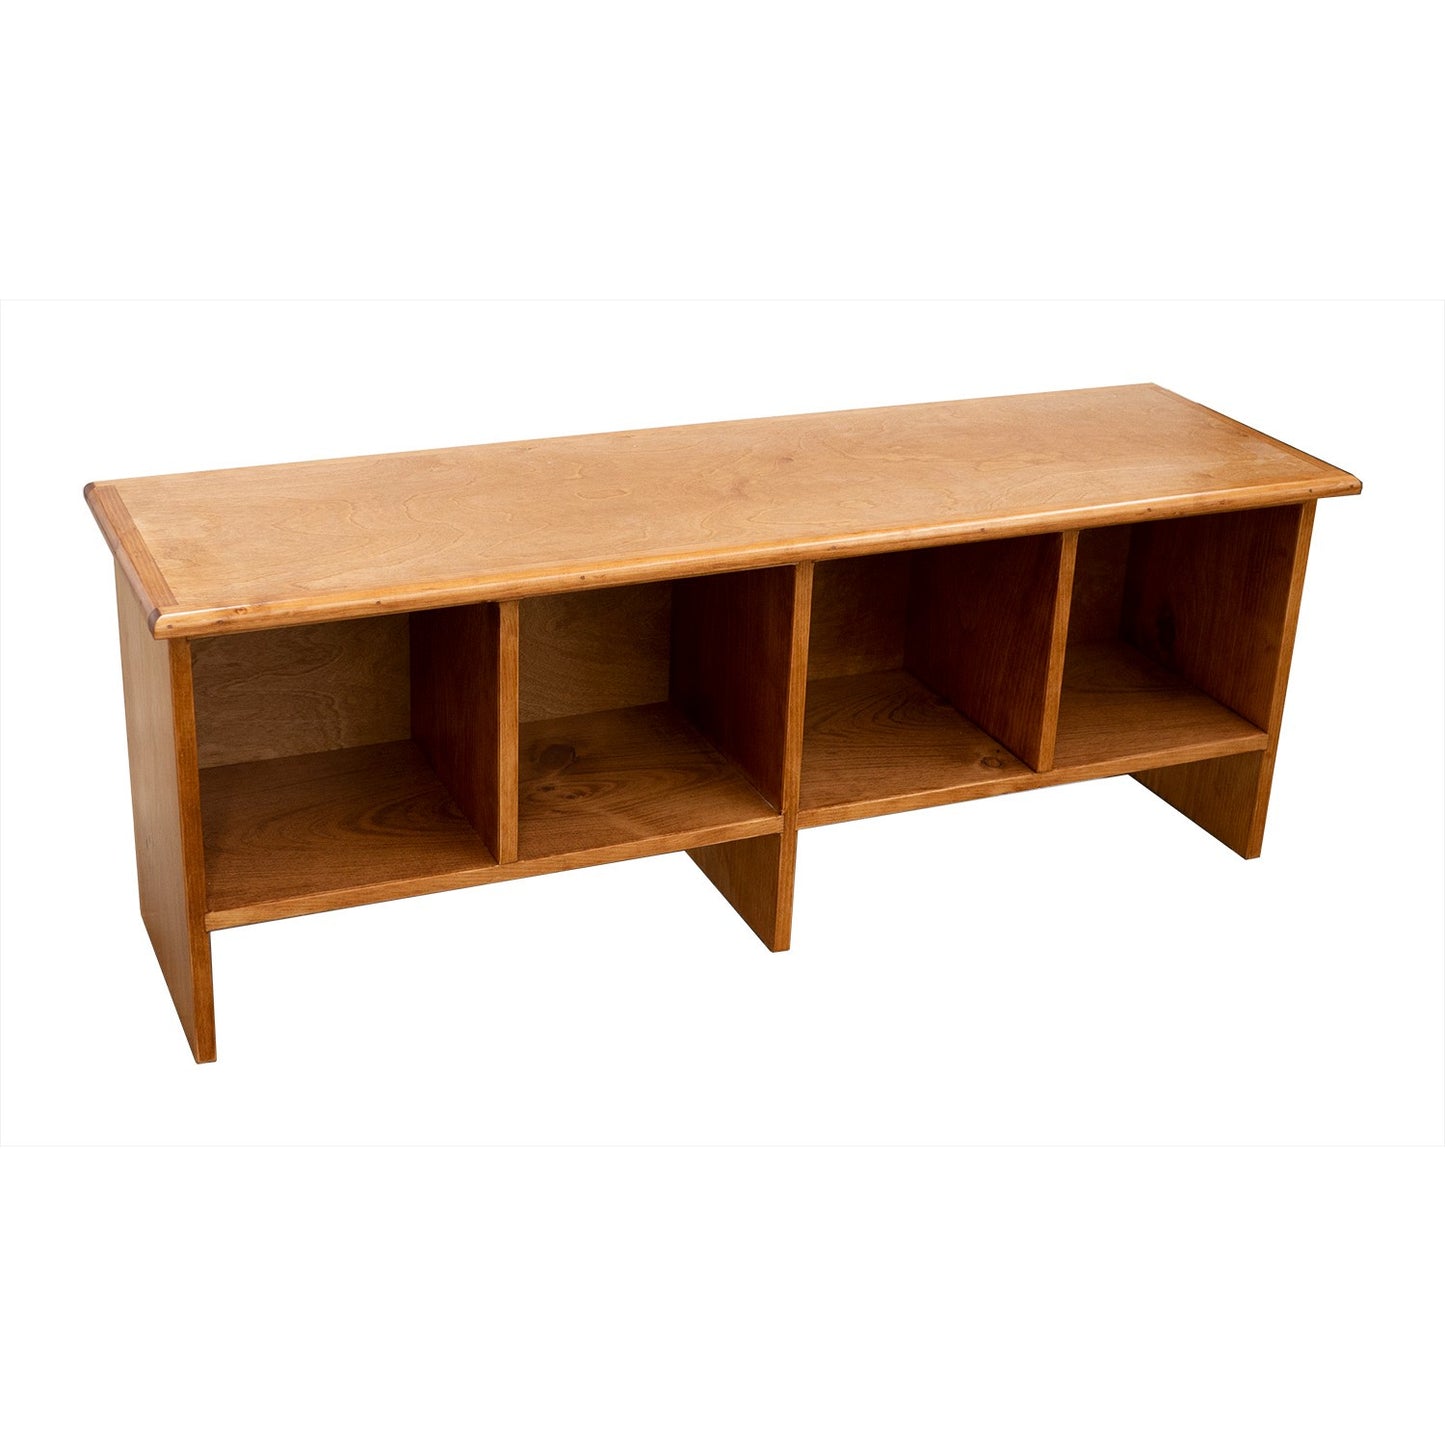 Evergreen Cubby Bench constructed from pine and birch,  Shown in Legacy Cherry finish.